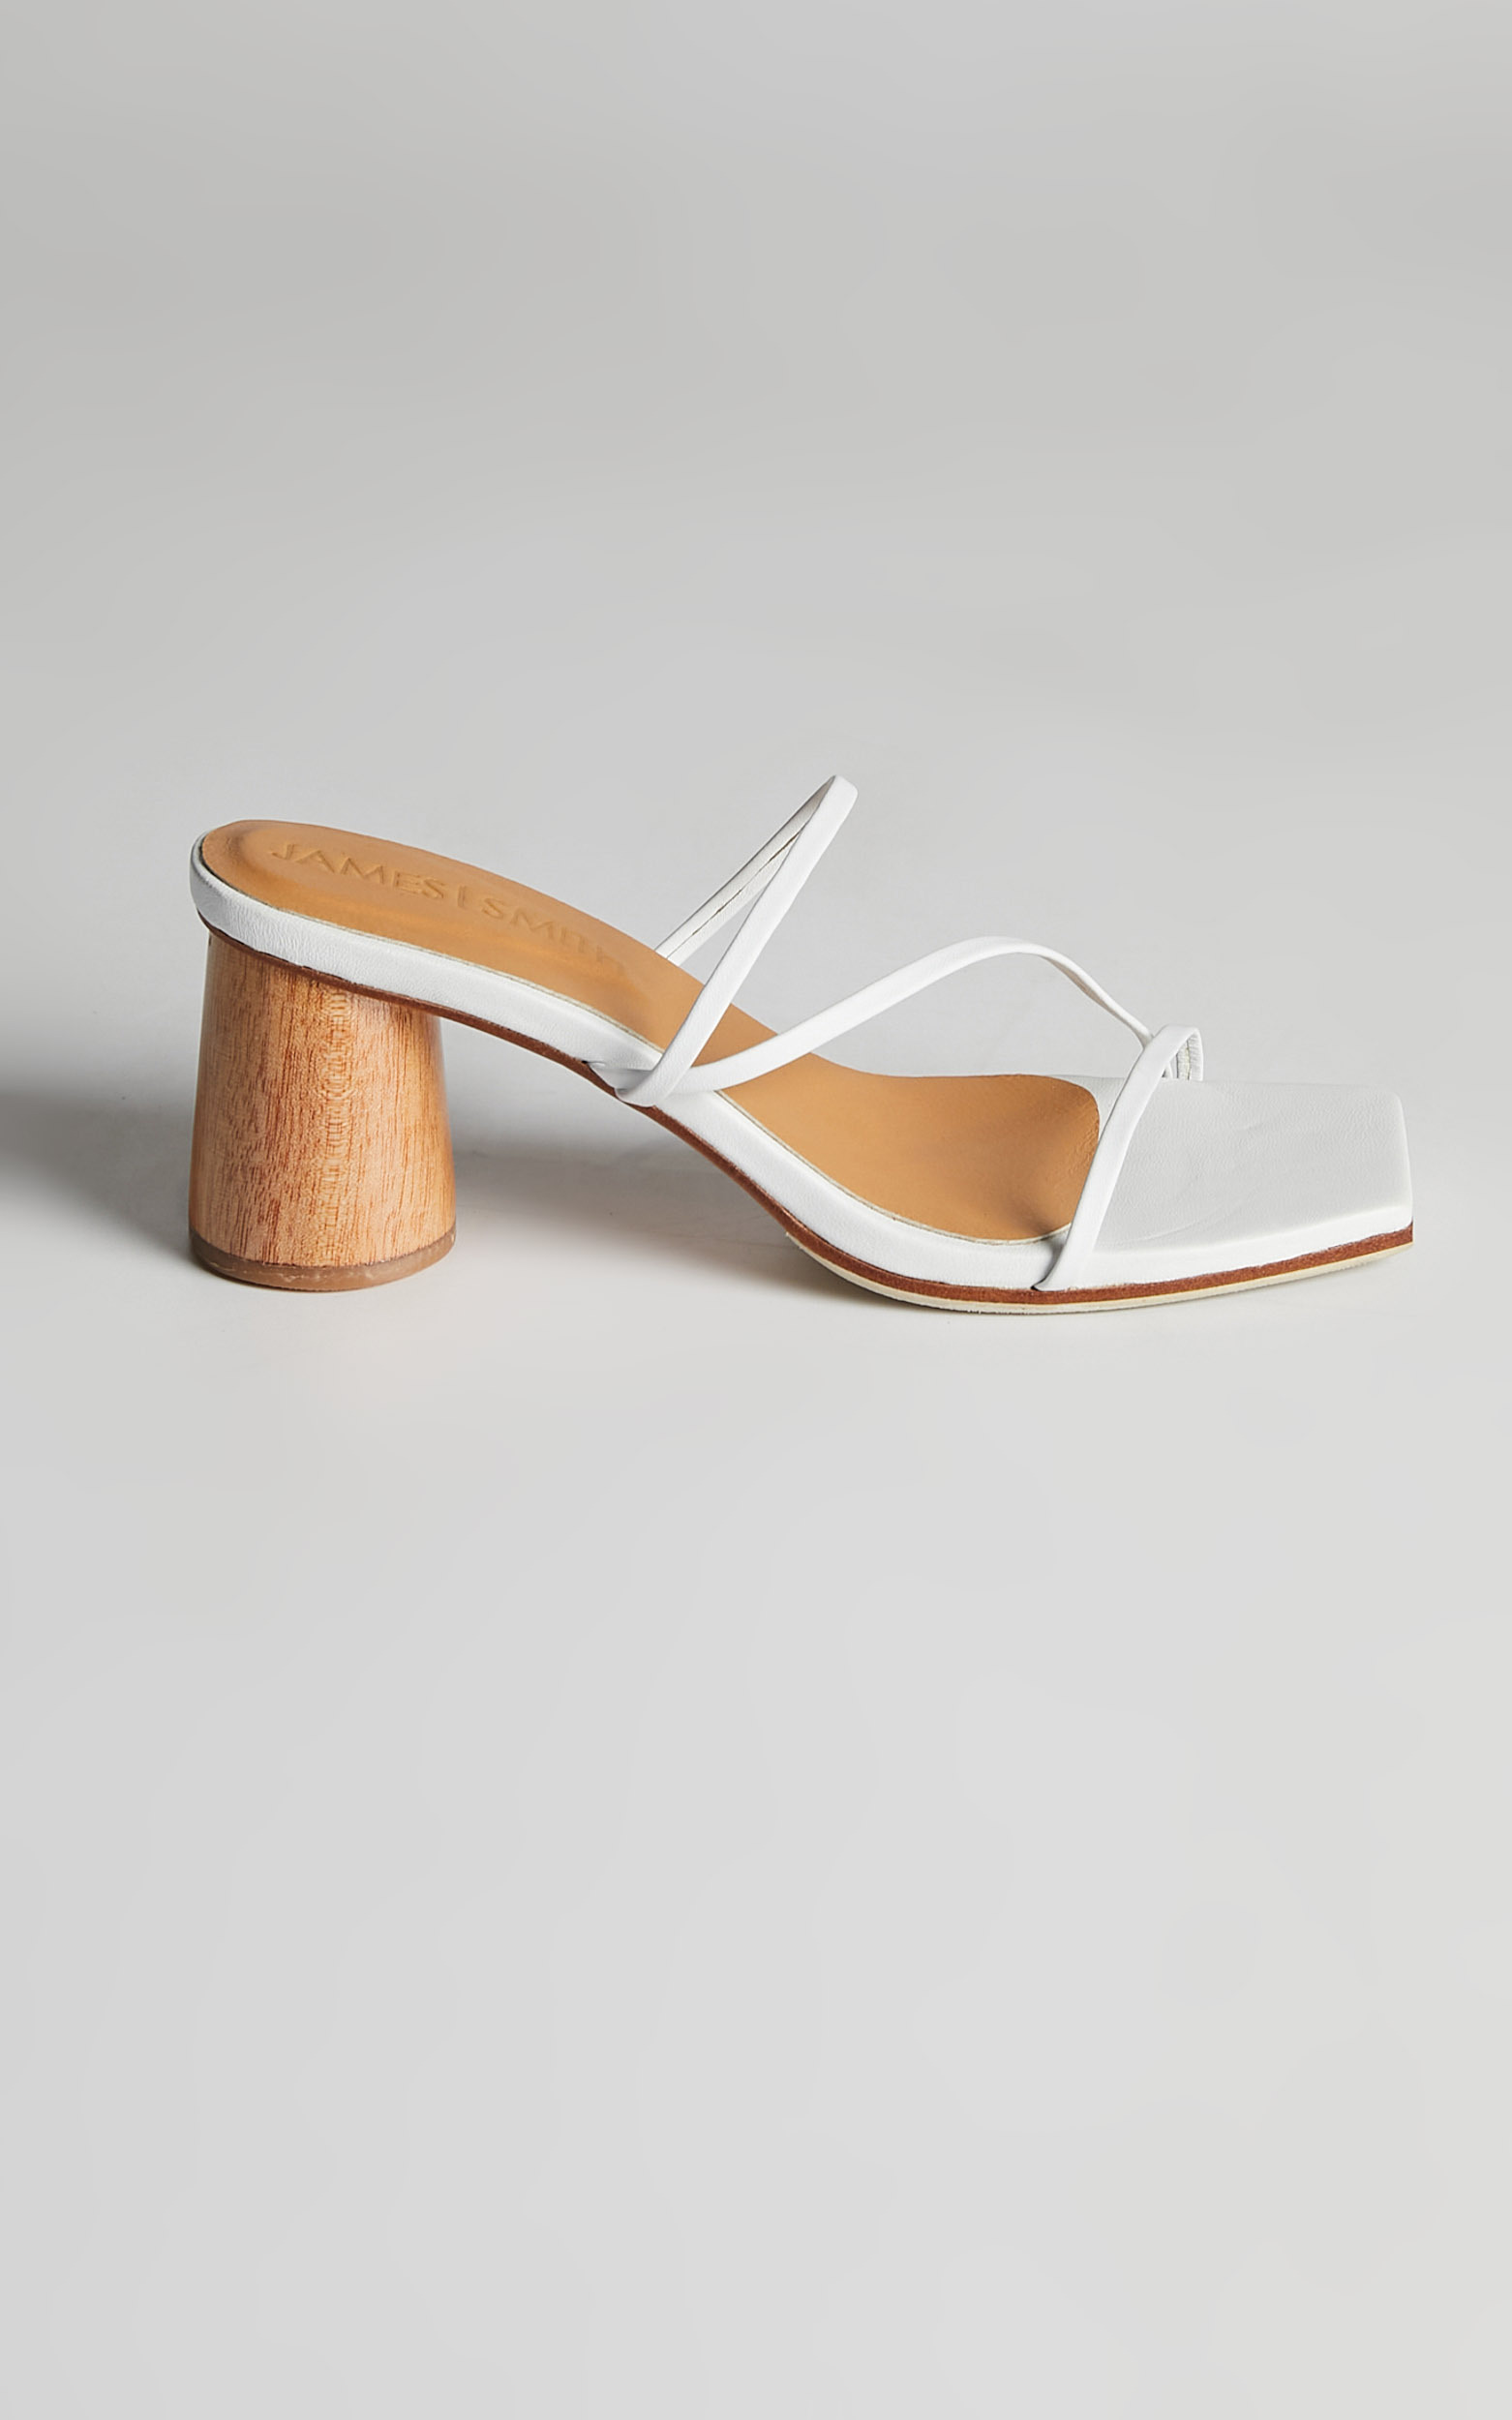 James Smith - Amore Mio Strappy Sandal in White - 05, WHT2, hi-res image number null